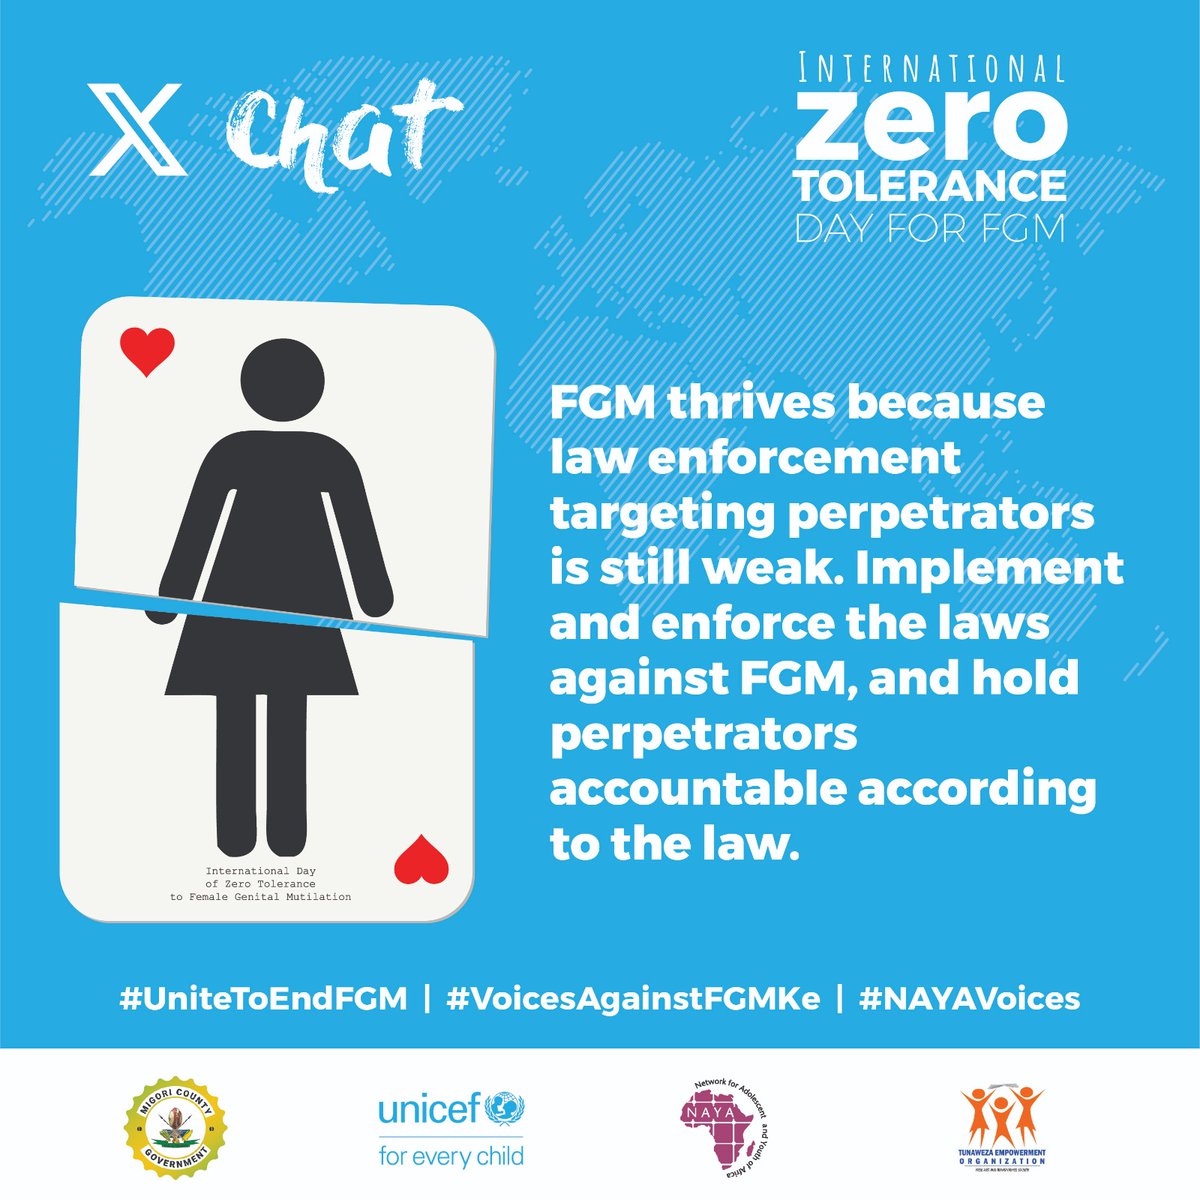 Our fight against FGM must be intersectional, embracing all identities and backgrounds.
No girl or woman should be left behind in our quest for bodily autonomy and equality. #UnitedToEndFGM
#VoicesAgainstFGMKe
#NAYAVoices #HerVoiceMatters
@Unicefprotects @UNICEFKenya
@JackOnyando